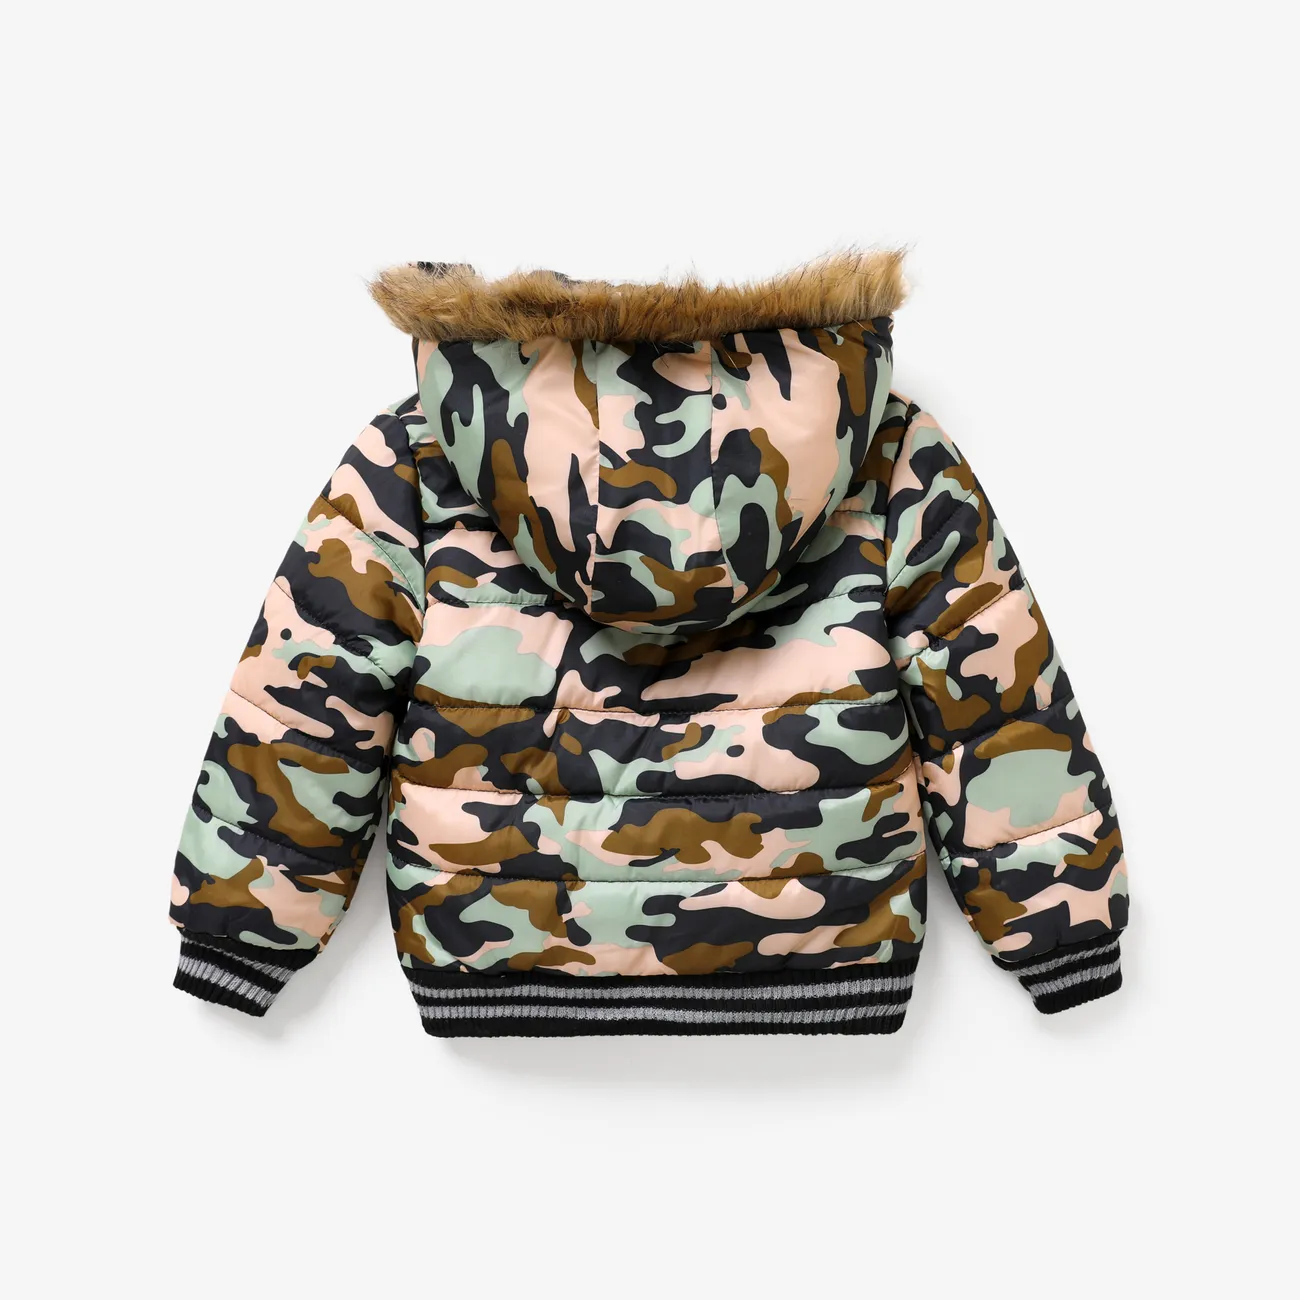 Toddler/Kid Boys Sporty Solid color/Camouflage Big Fuzzy Hooded Cotton Jacket Camouflage big image 1